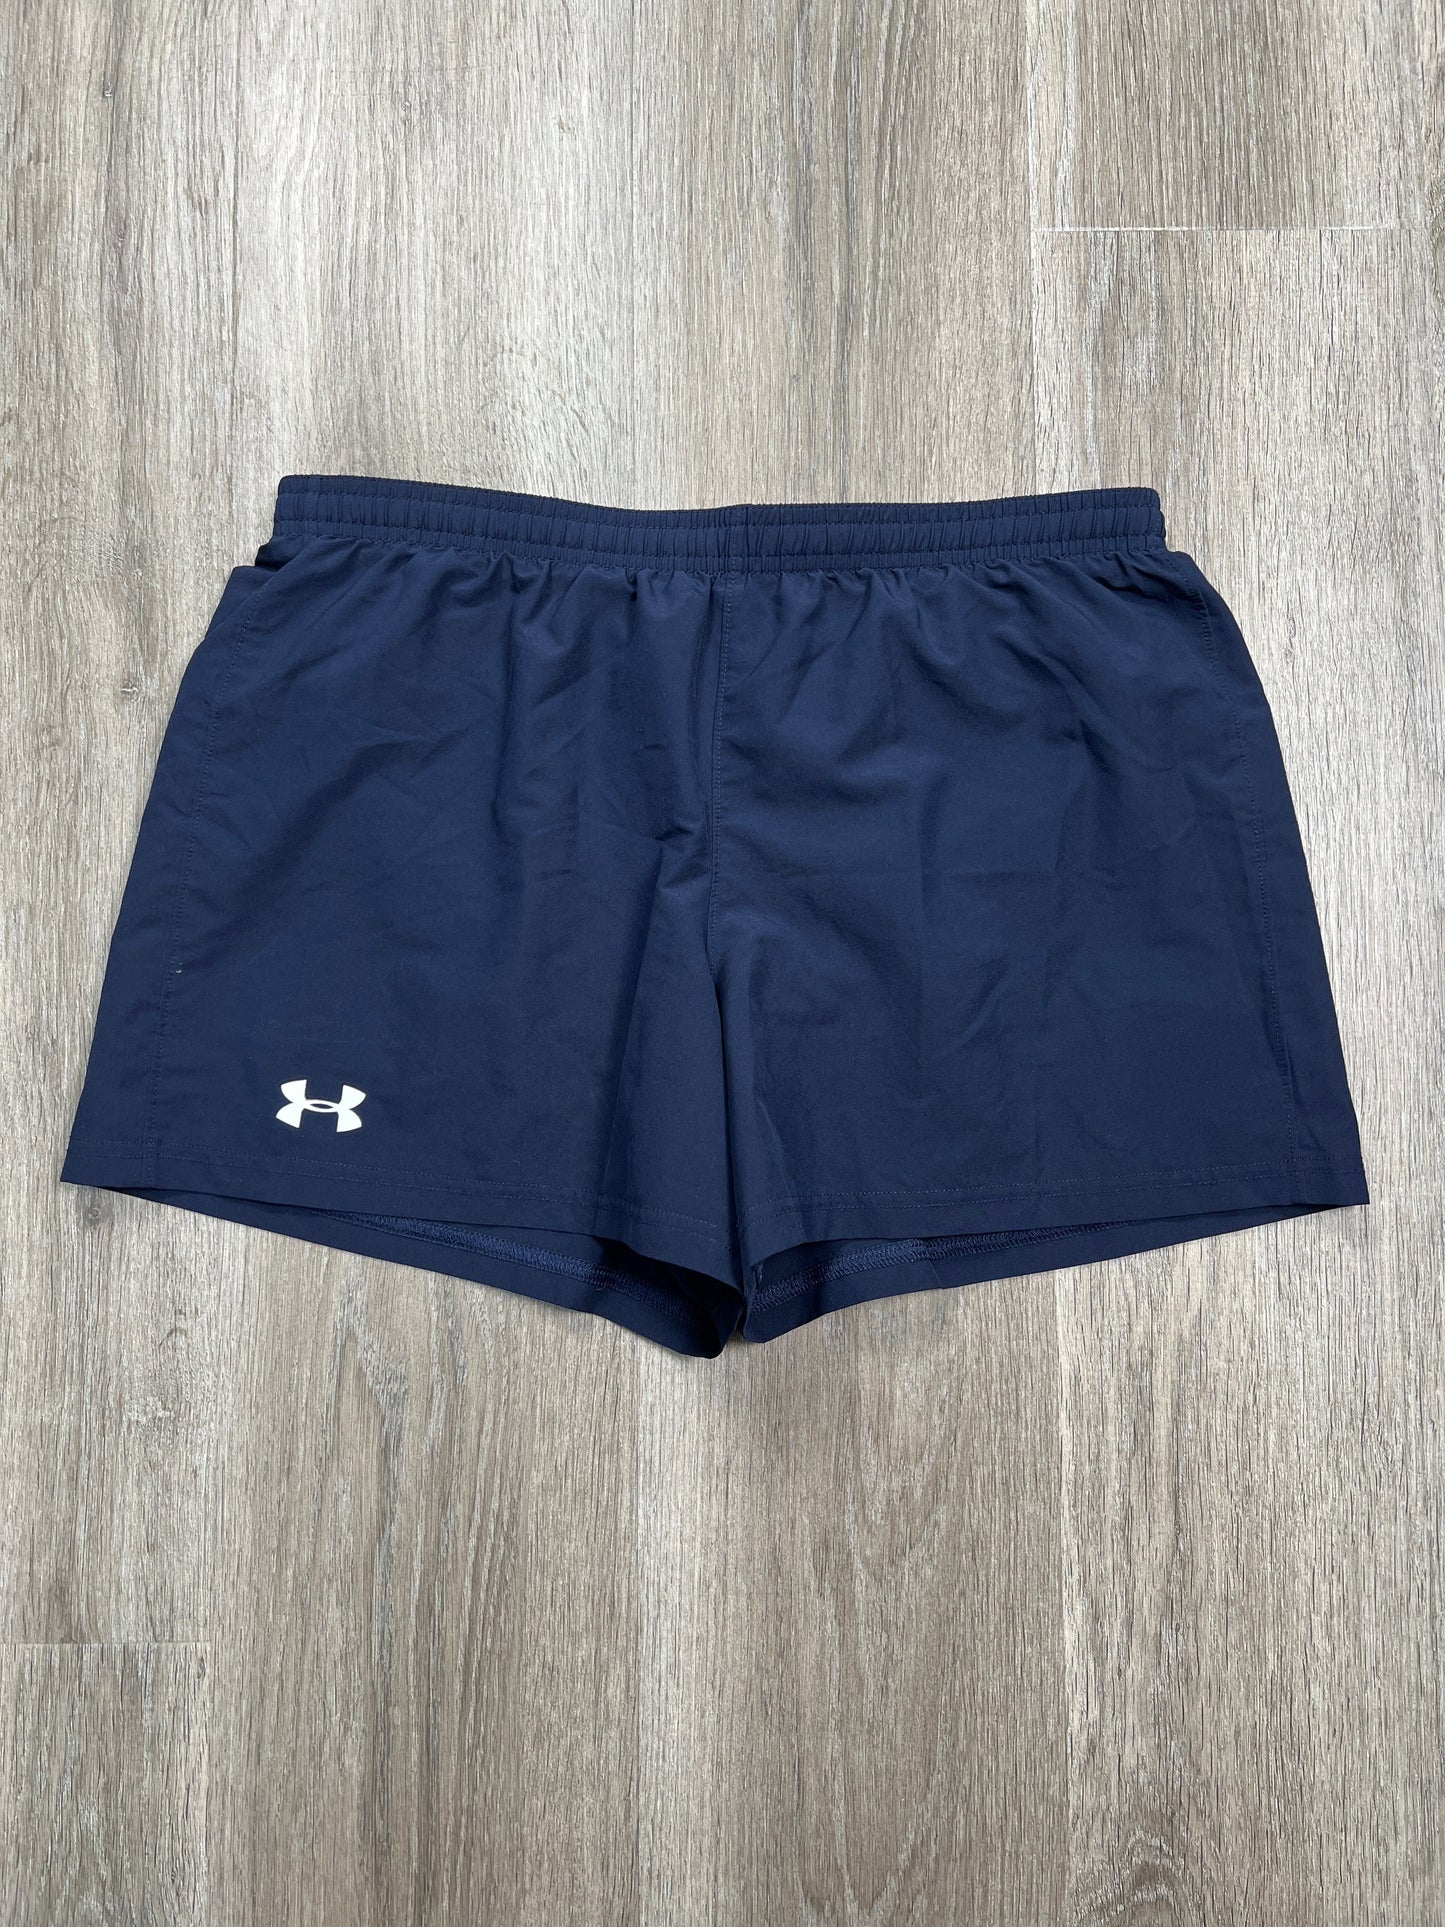 Navy Athletic Shorts Under Armour, Size M